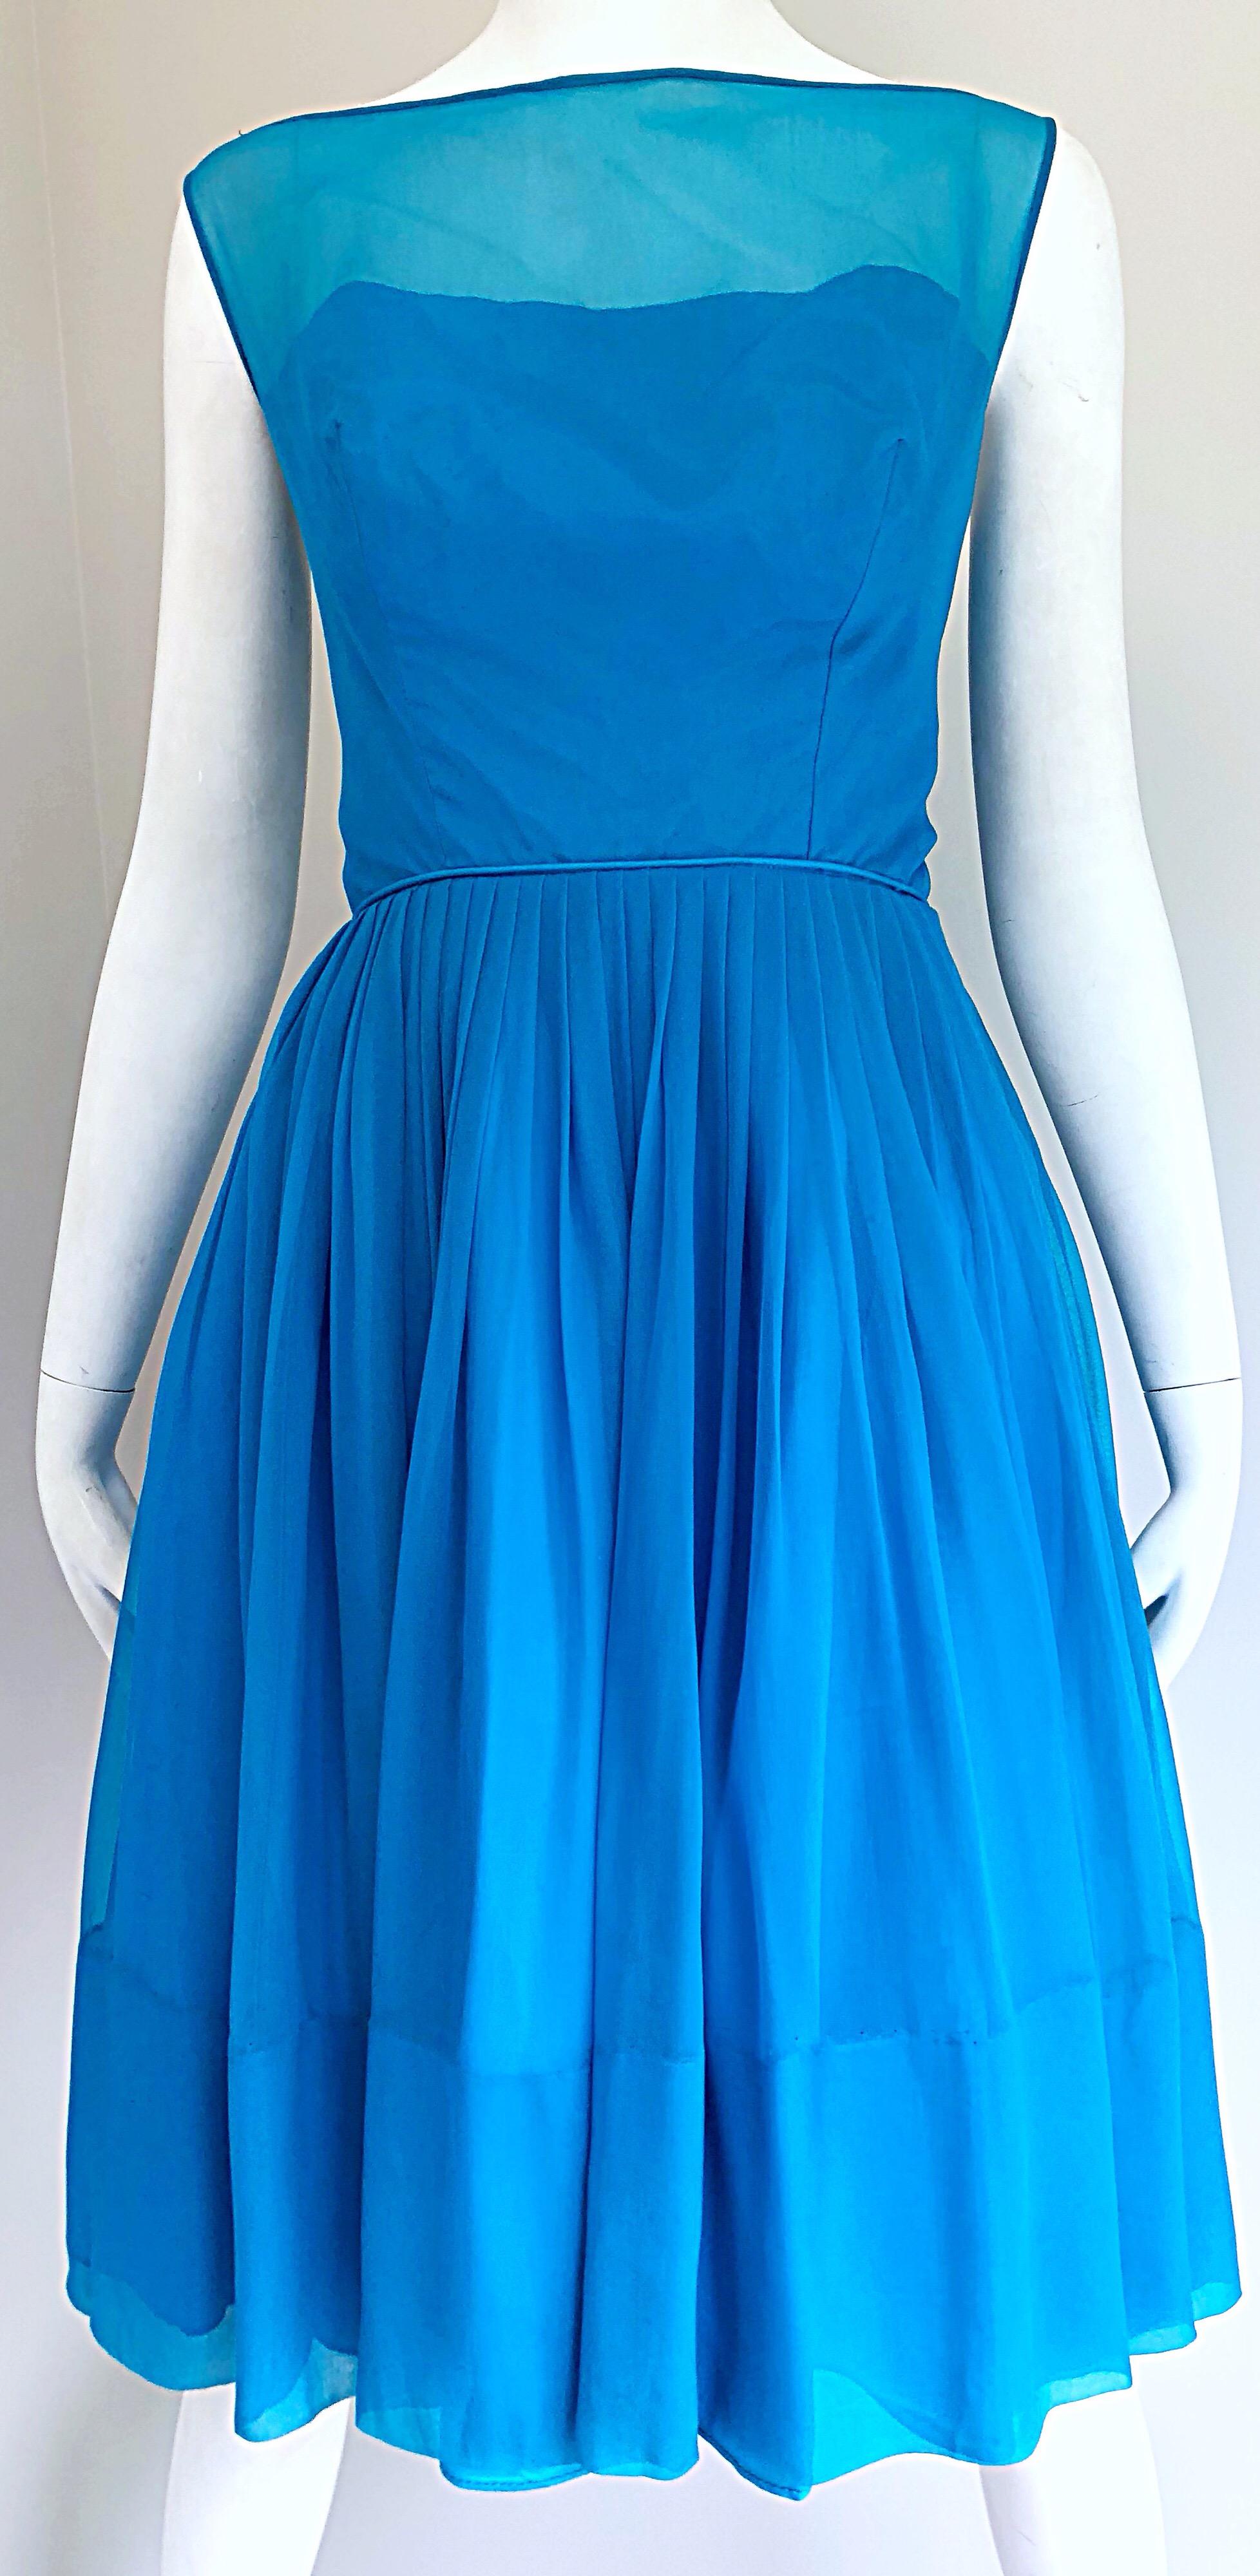 Women's 1950s Turquoise Blue Silk Chiffon Nude Illusion Fit n' Flare Vintage 50s Dress